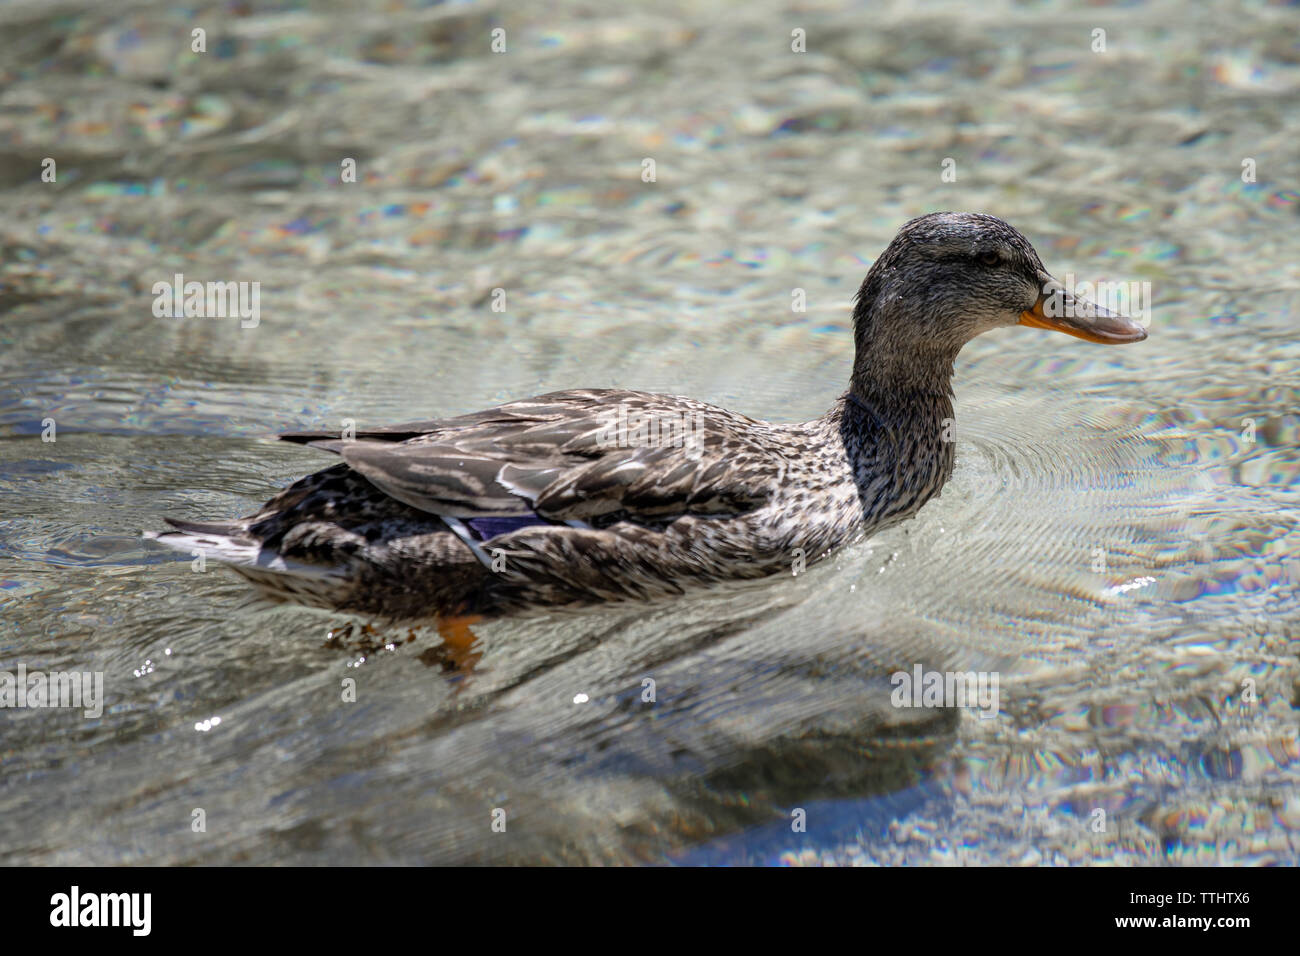 A duck swimming in Lago Ghedina, an alpine lake in Cortina D'Ampezzo, Dolomites, Italy Stock Photo